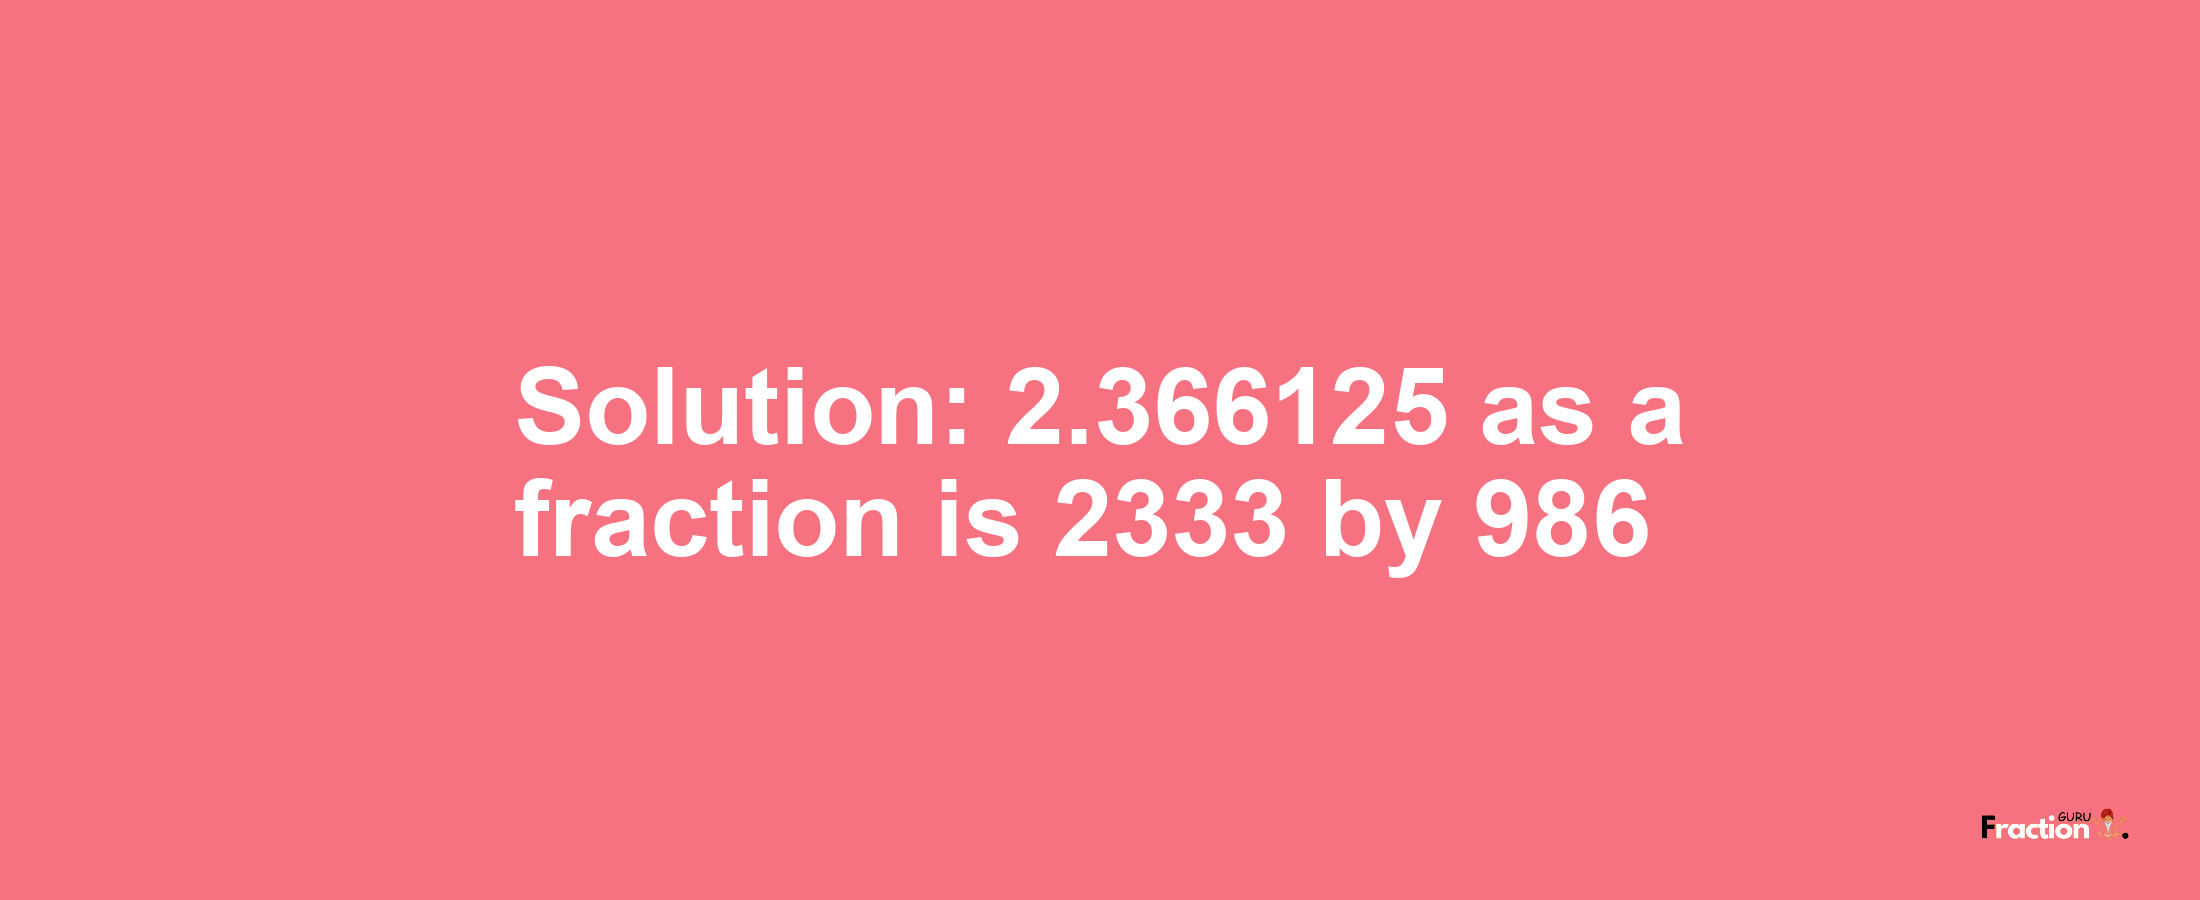 Solution:2.366125 as a fraction is 2333/986